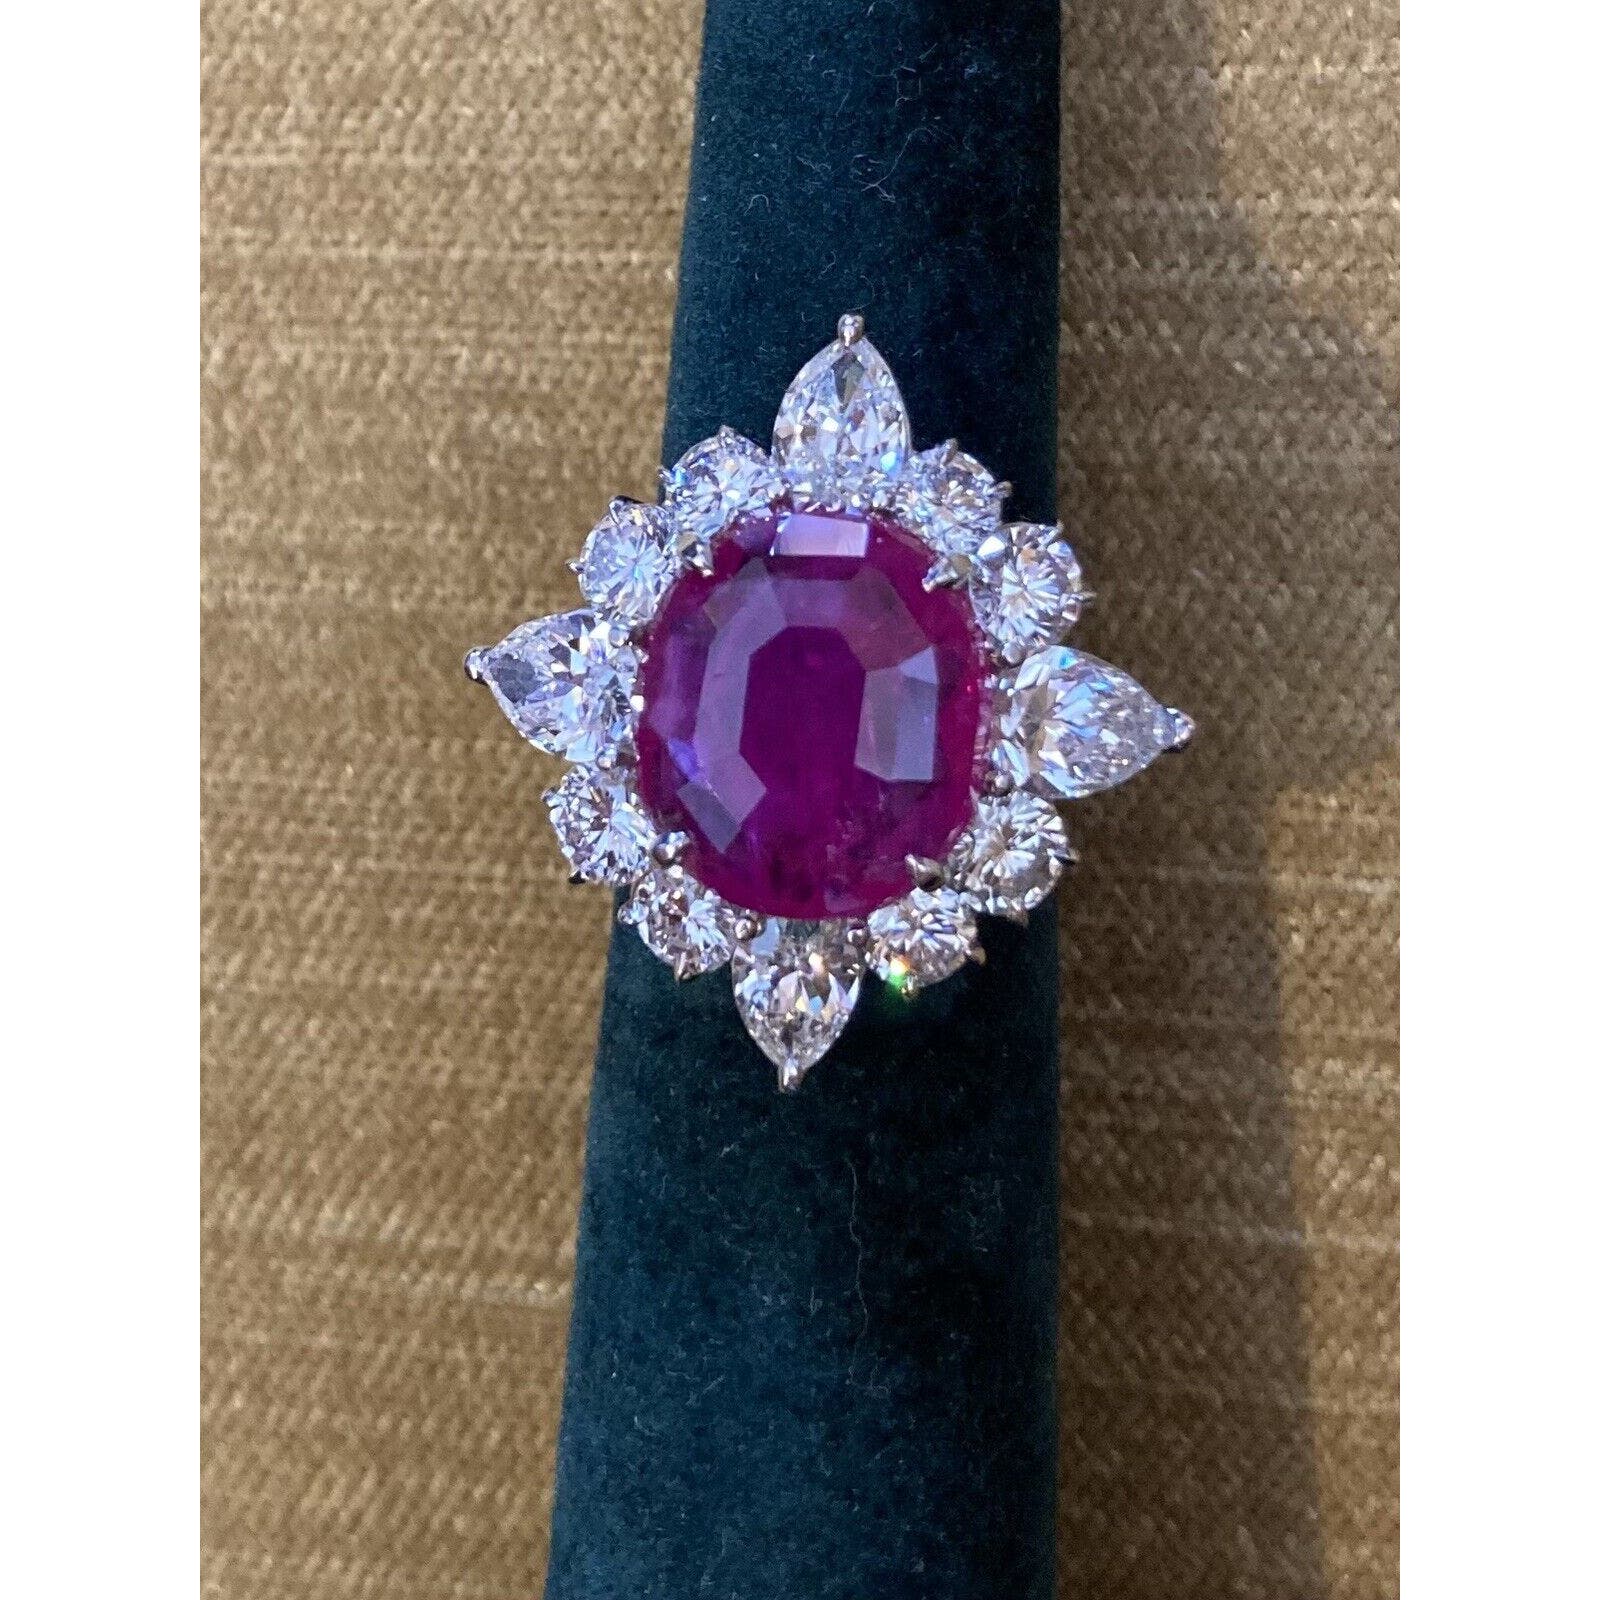 AGL 9.34 ct Unheated Burma Ruby and Diamond Ring in Platinum -HM2500